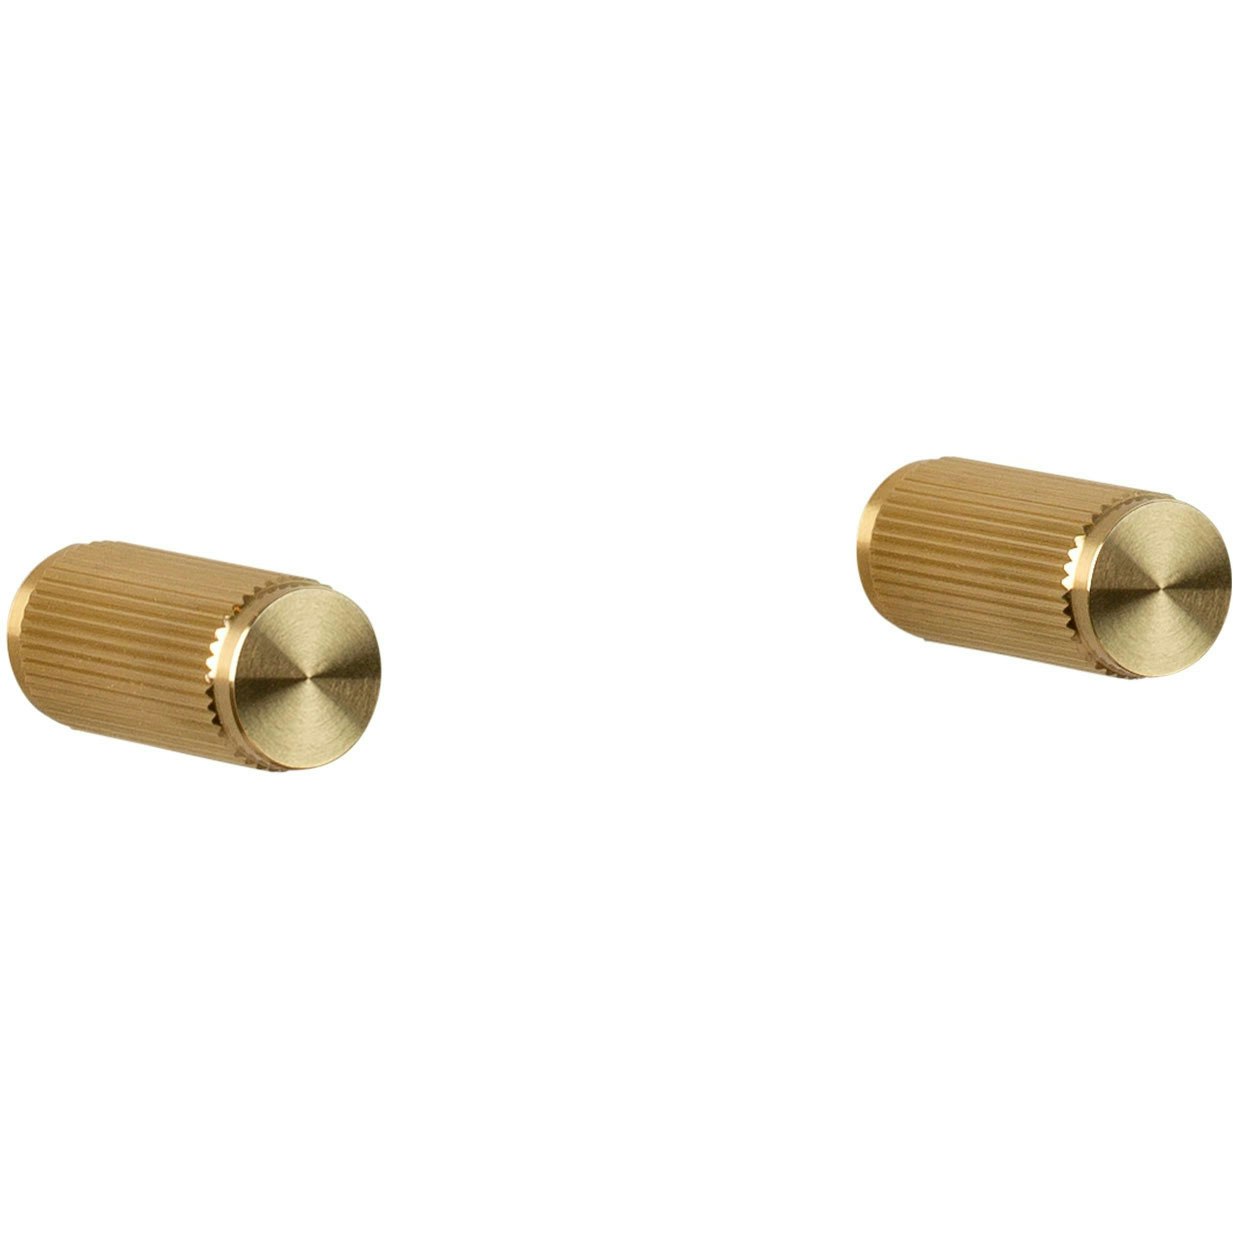 Linear Knobs 2-pack, Brass